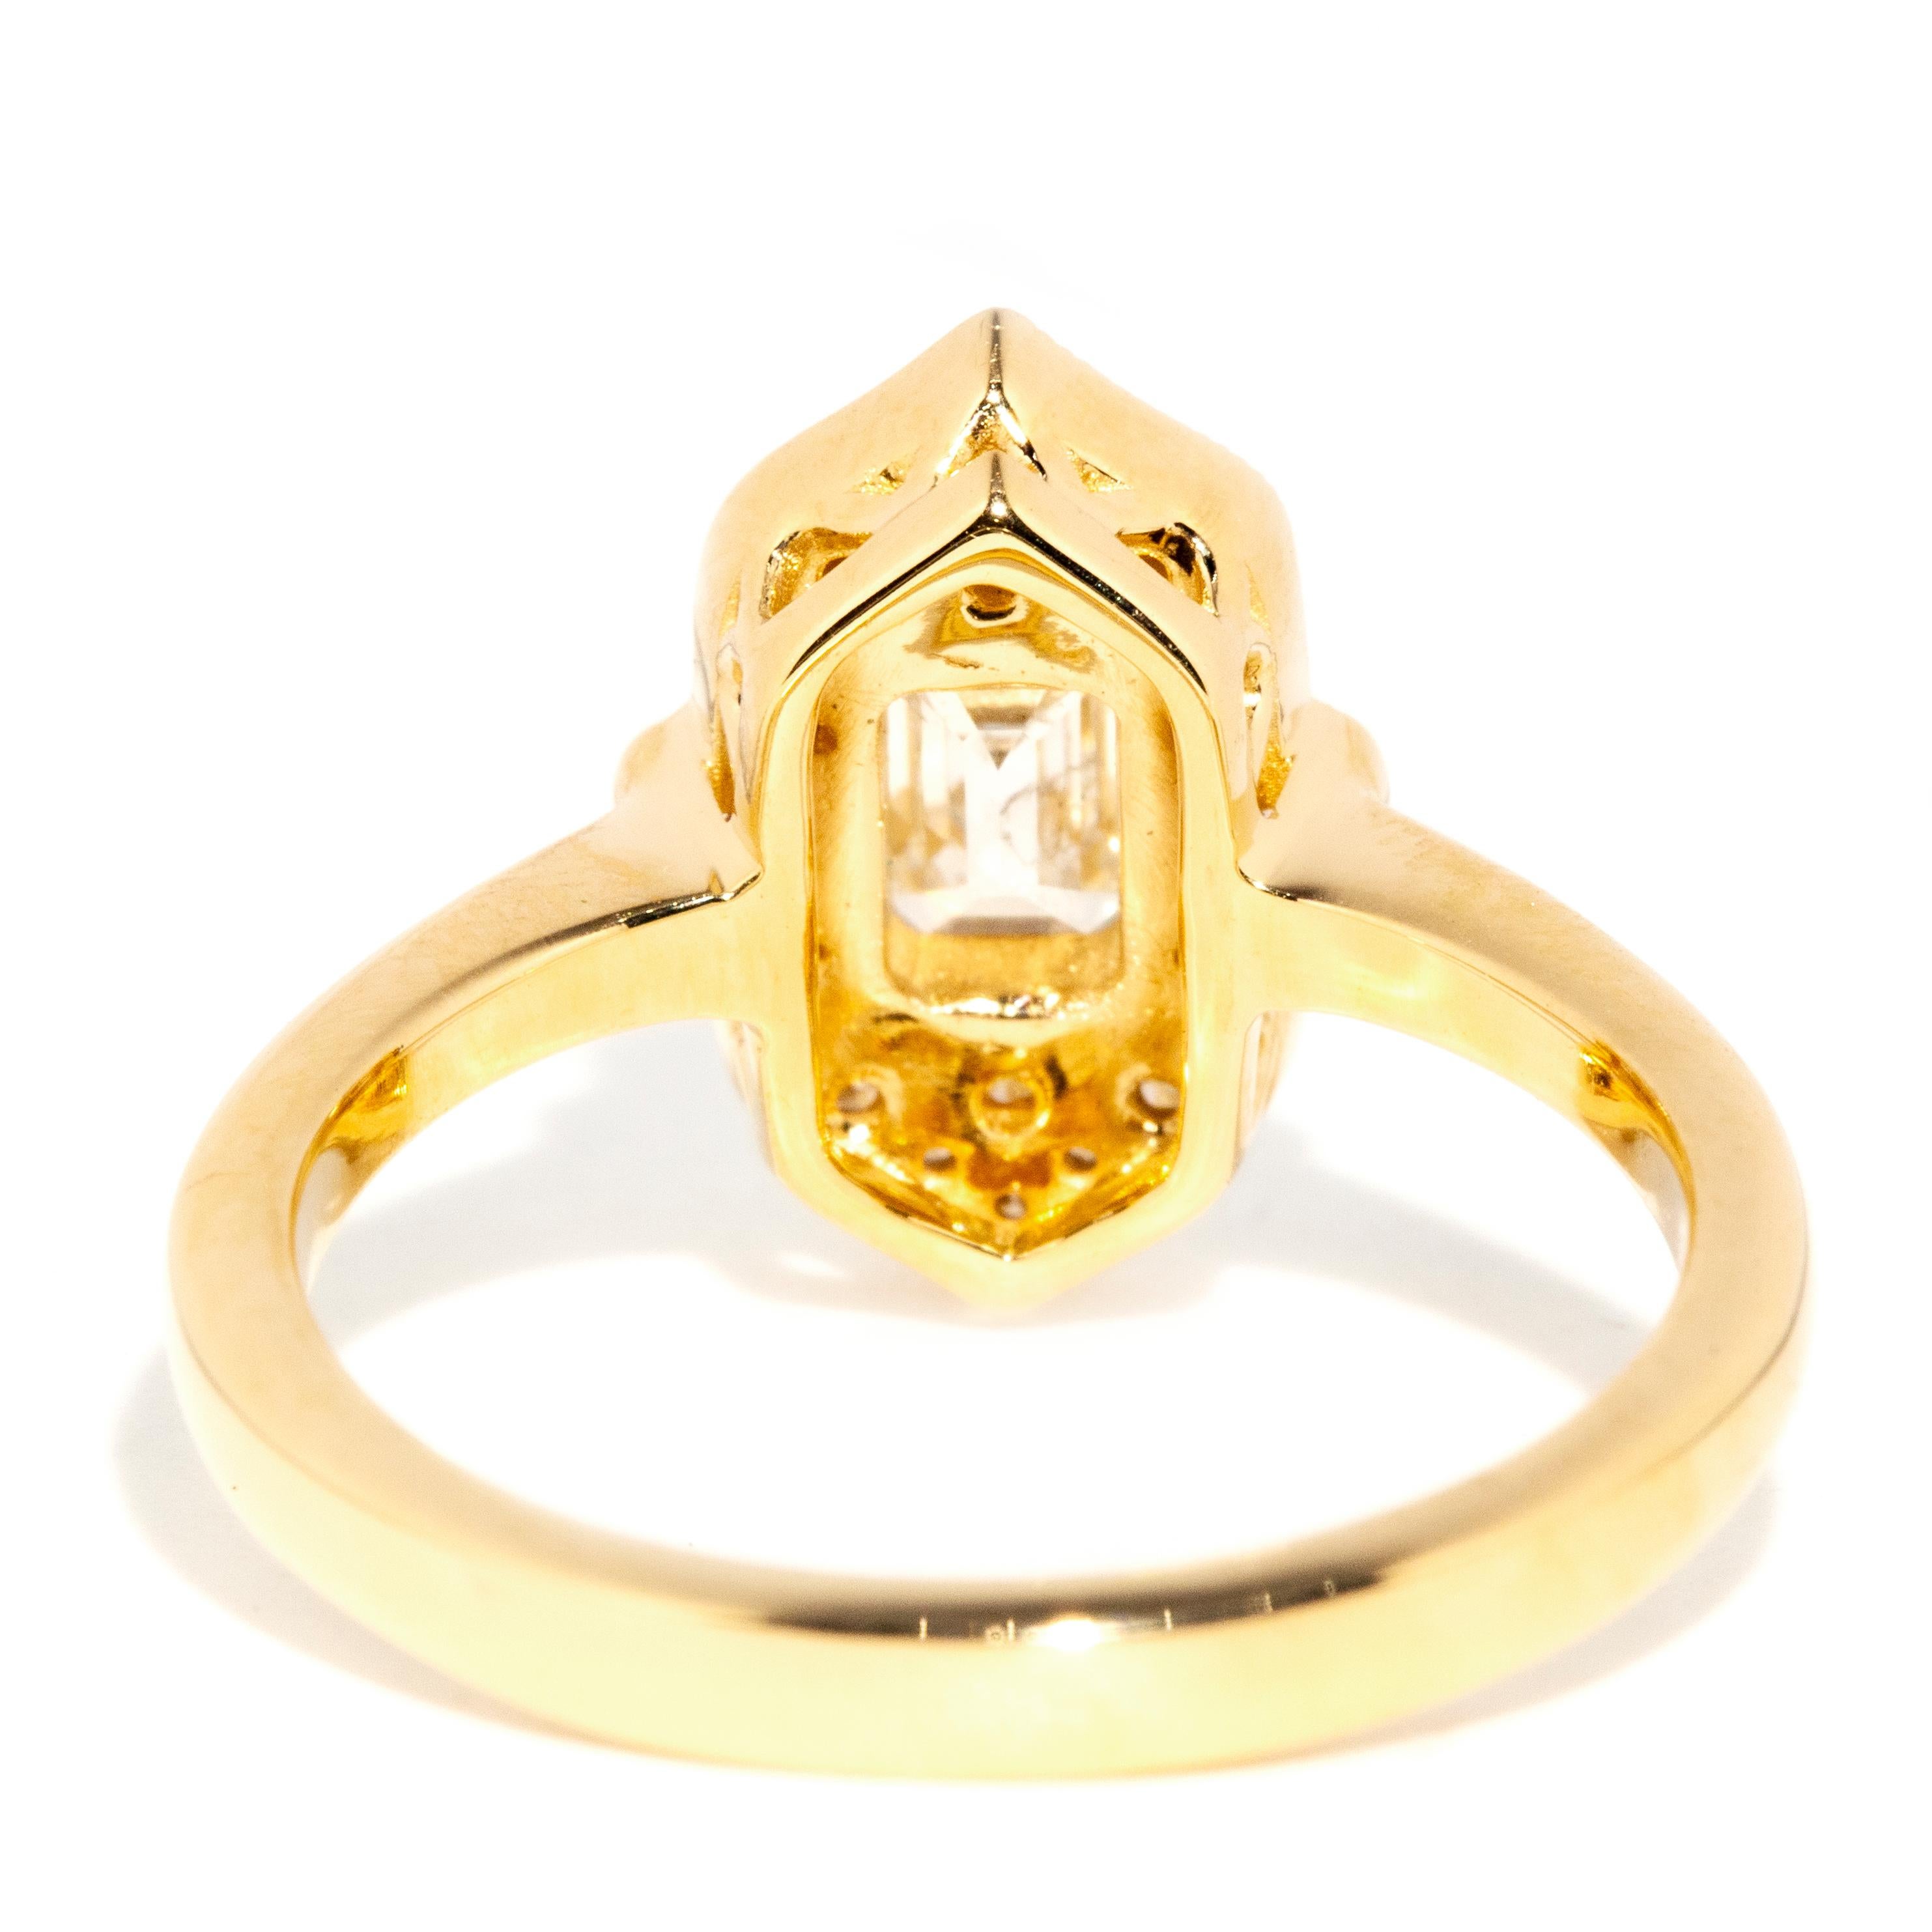 Contemporary HRD Certified 18 Carat Yellow Gold Emerald Cut Diamond Cluster Ring 5